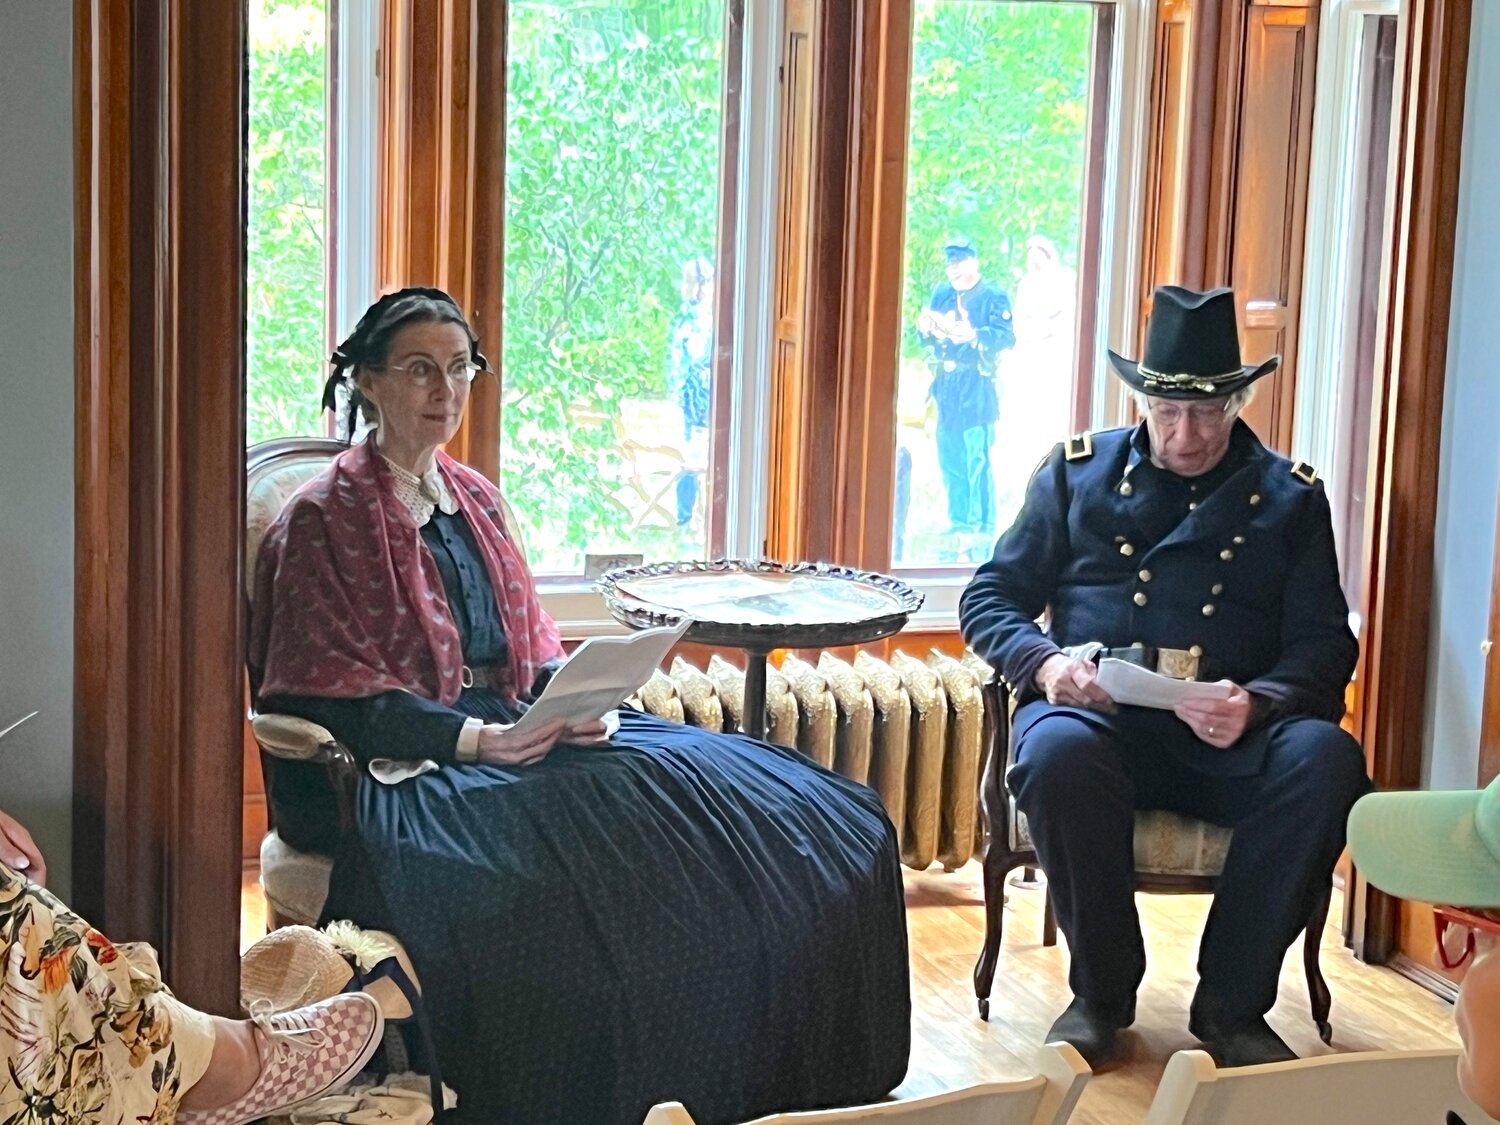 Letters from 1862, with Susan Hynes and Jeff Reiswig were one of the many highlights of the Civil War Weekend at the LeDuc Historic Estate in Hastings. The event was held Saturday and Sunday on the grounds of the estate and featured many interesting historic events and activities. Hynes and Reiswig read actual letters exchanged by William and Mary LeDuc when he was away enlisted, working his way from Captain to Brevet Brigadier General. The letters detailed construction of the LeDuc Estate, which was expected to cost $6,000 to construct in the 1860s and came in with a final price tag of about $30,000.